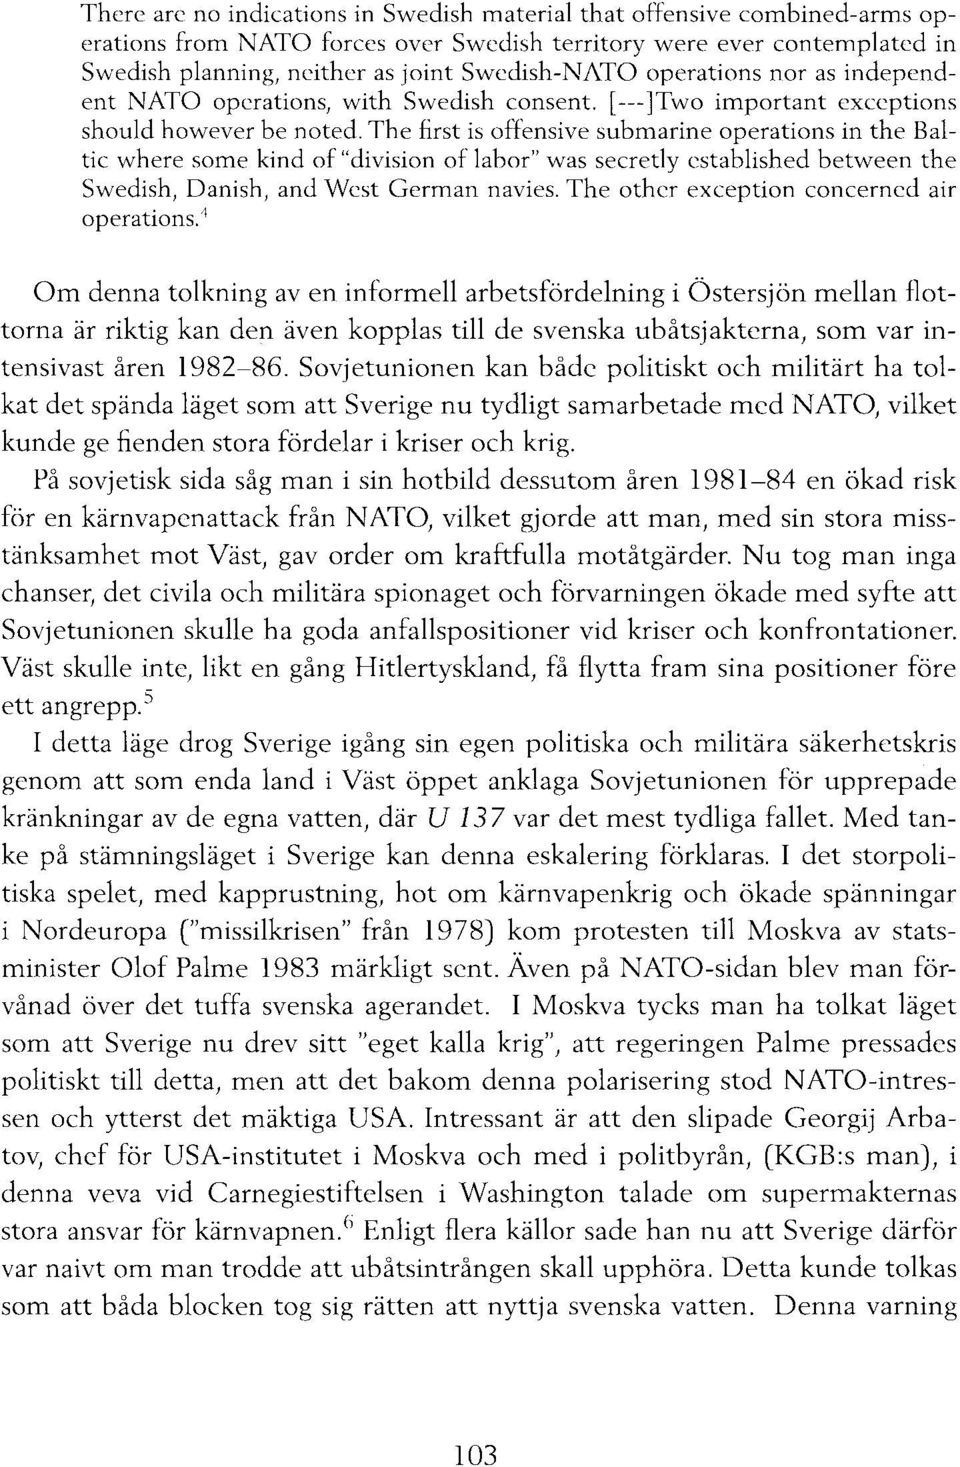 The first is offensive submarine operations in the Baltic where some kind of "division of la bor" was secretly established between the Swedish, Danish, and West German navies.